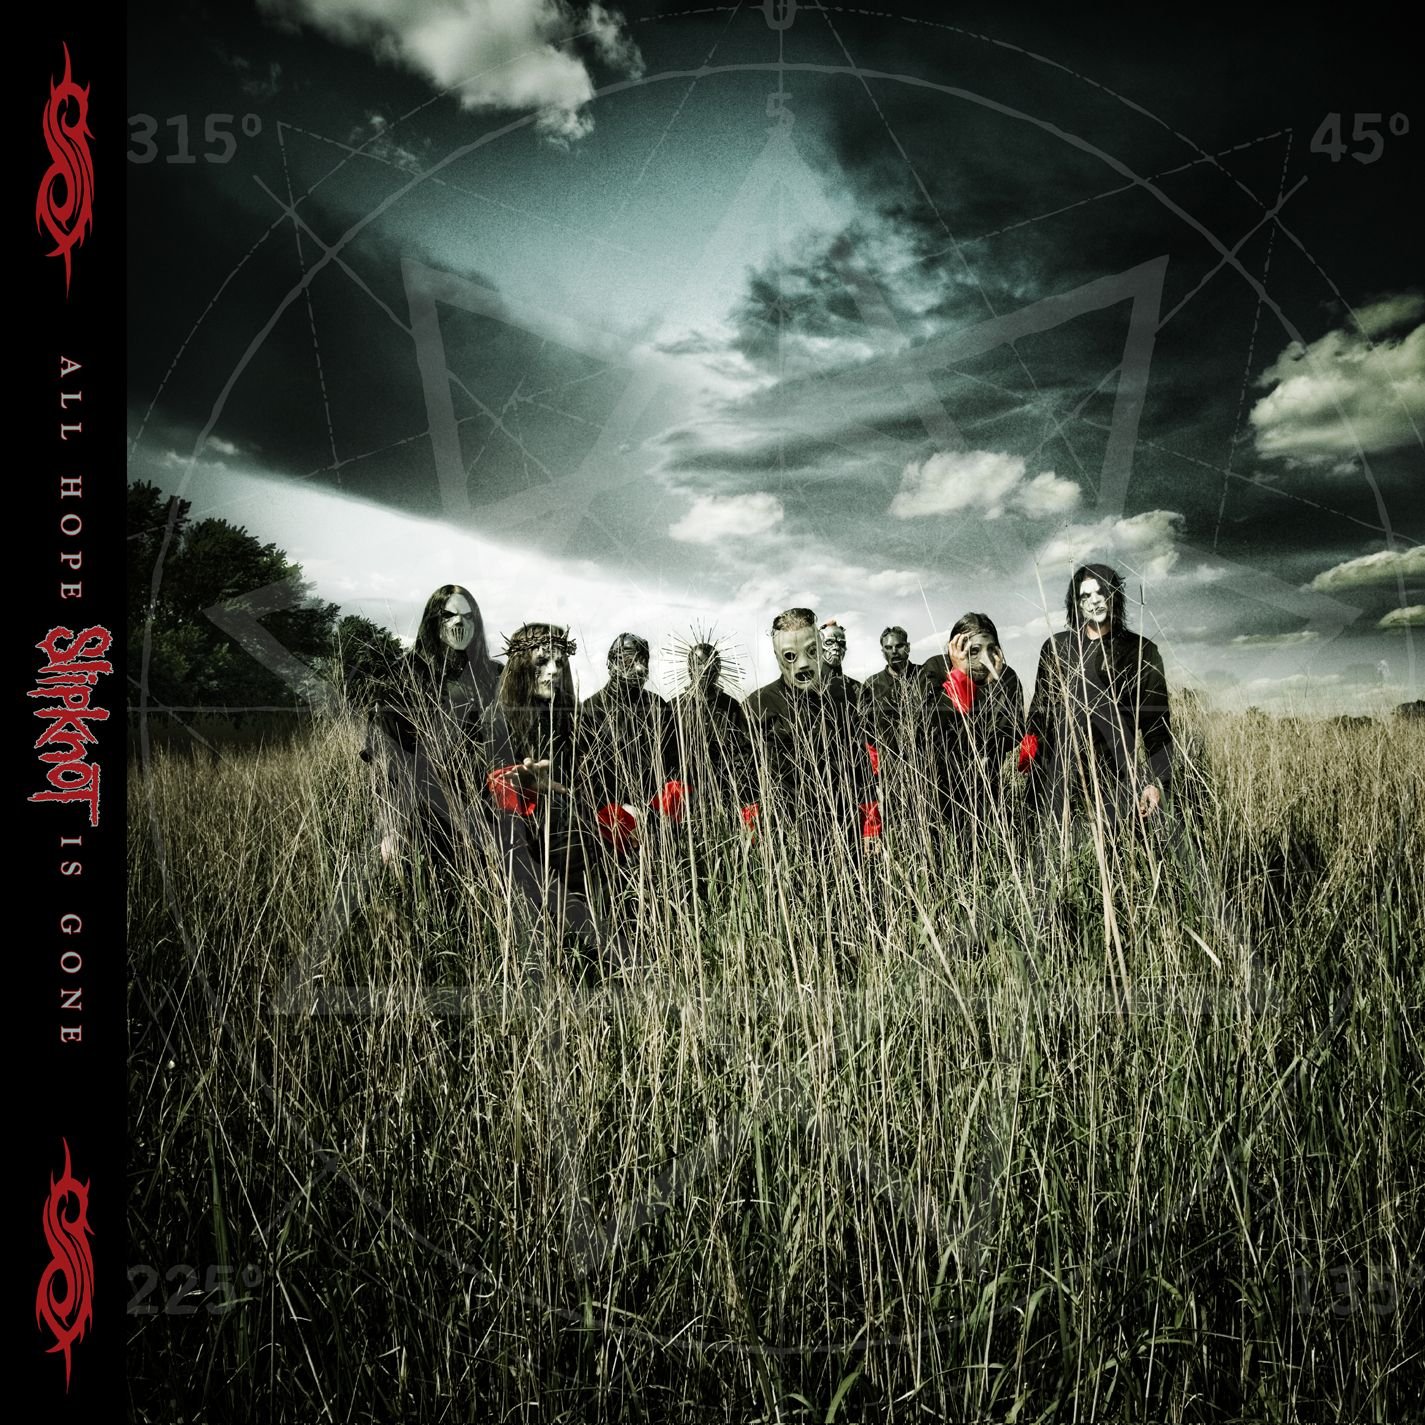 Slipknot-All Hope Is Gone-(RR7432-2)-2CD-FLAC-2018-RUiL Download